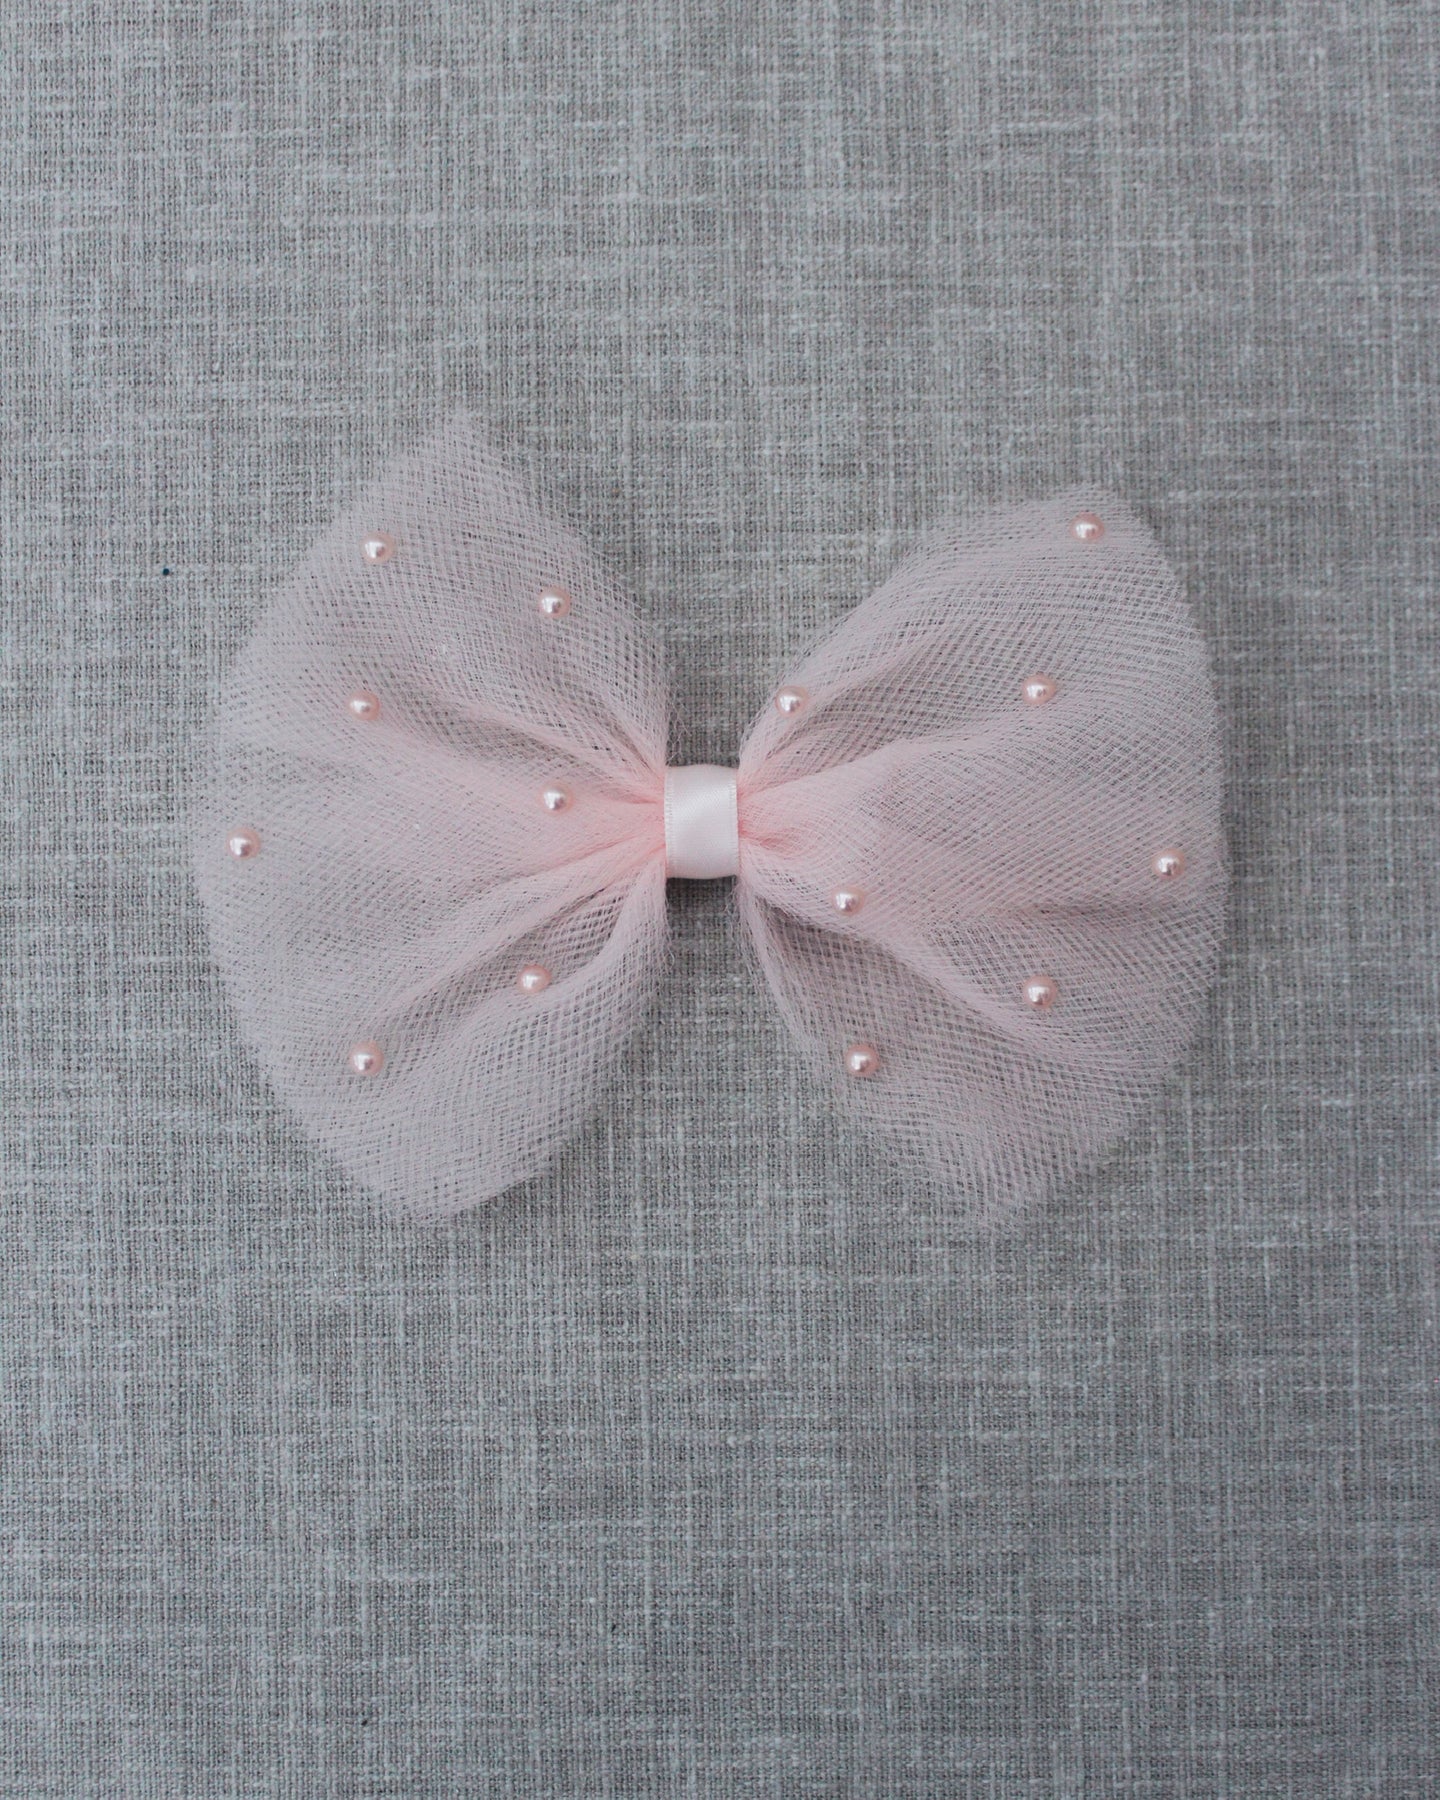 Sequin Pearl Hair Bow in Champagne